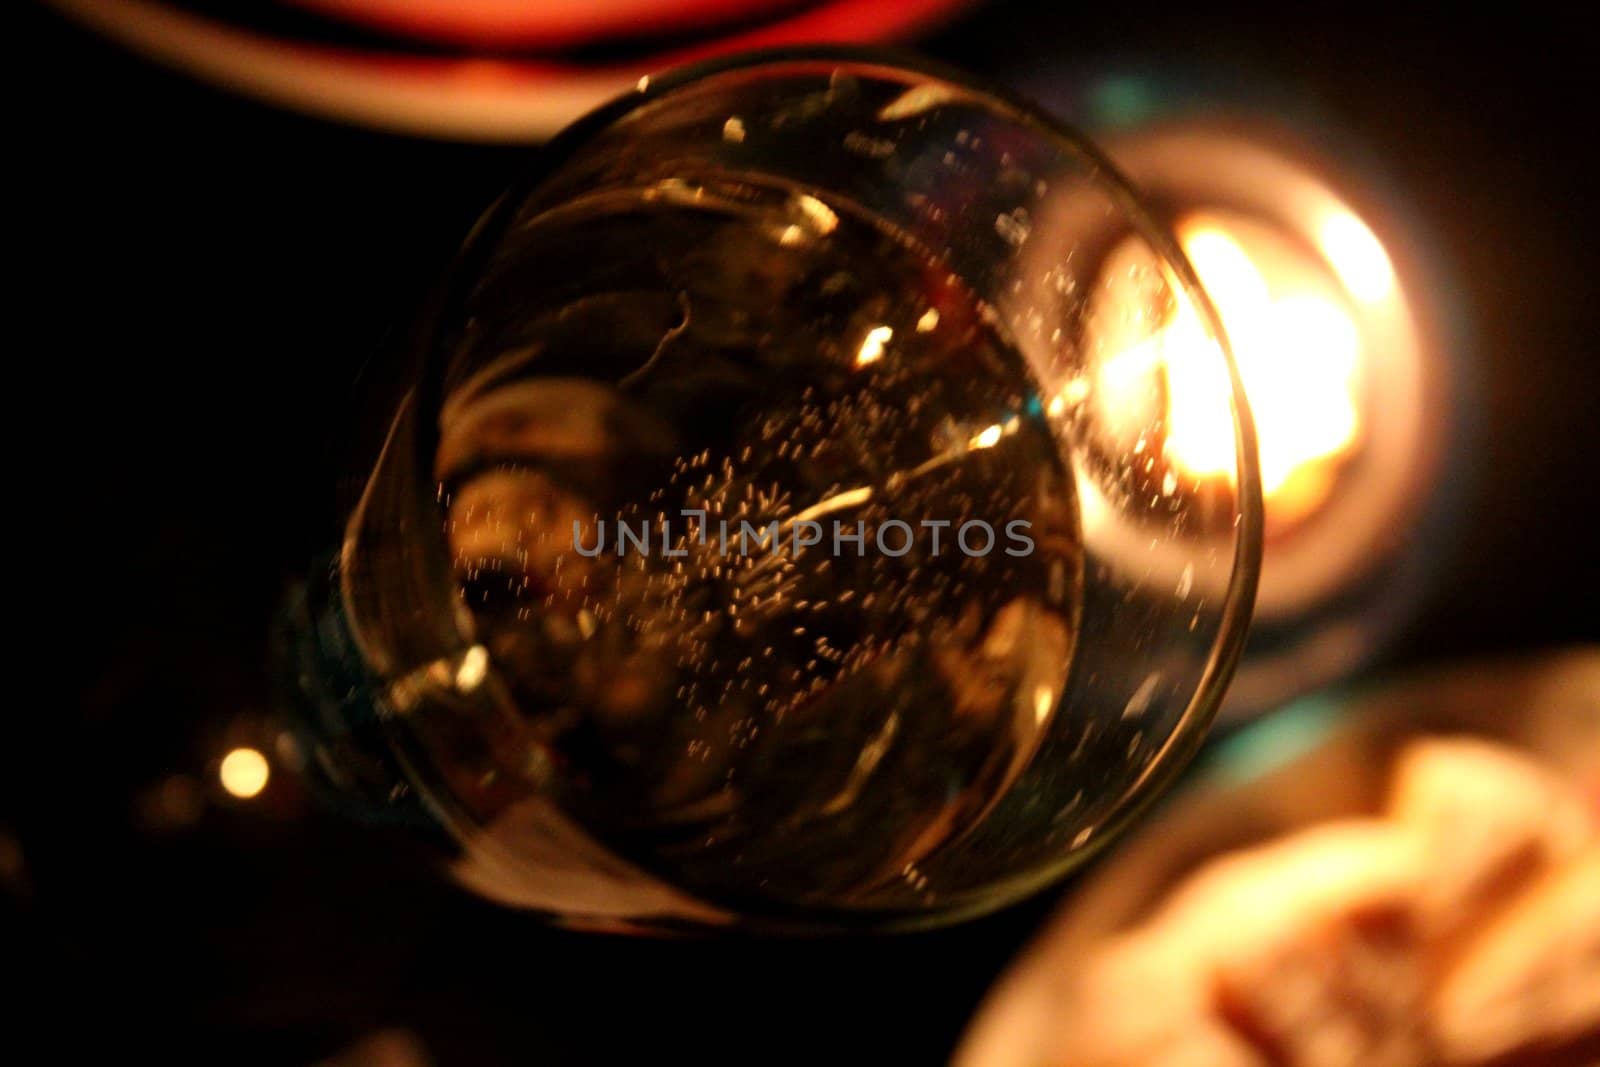 bubbly glass of champagne by candlelight, food still life